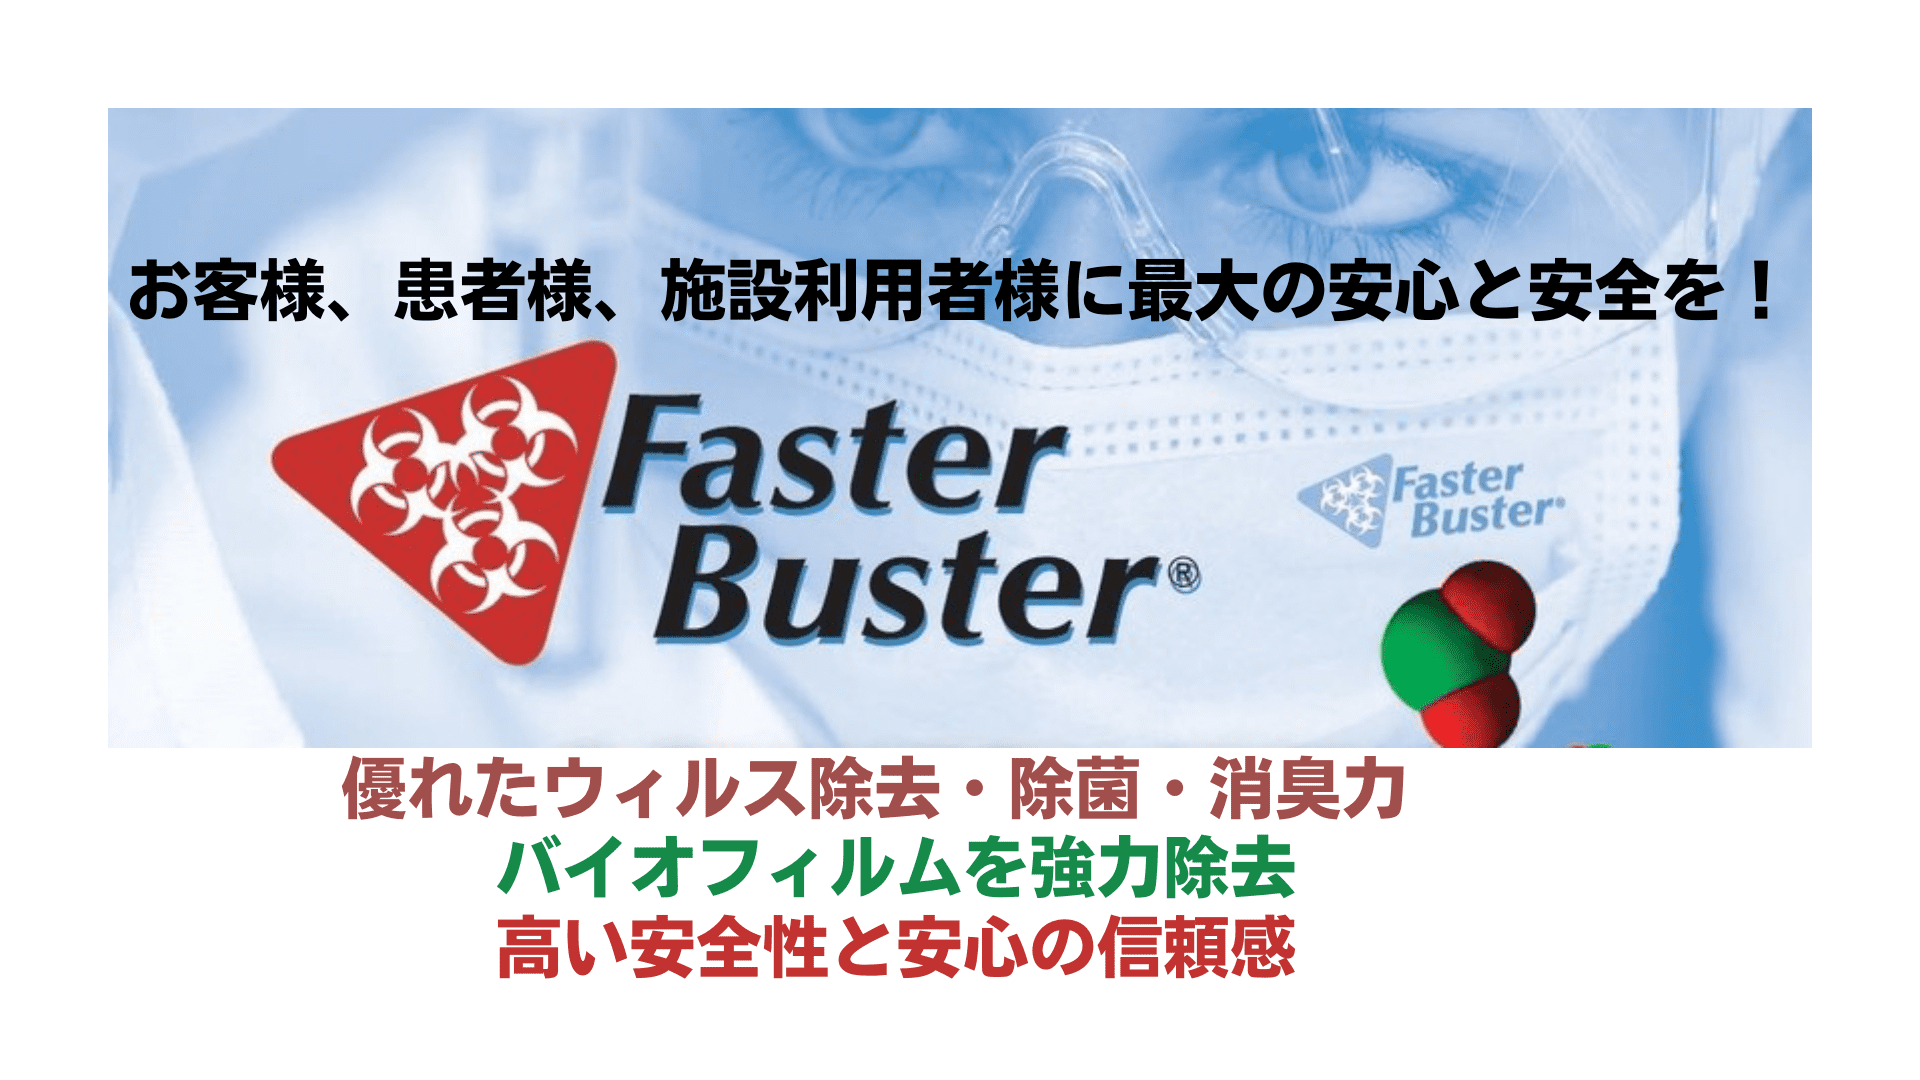 033_faster buster2